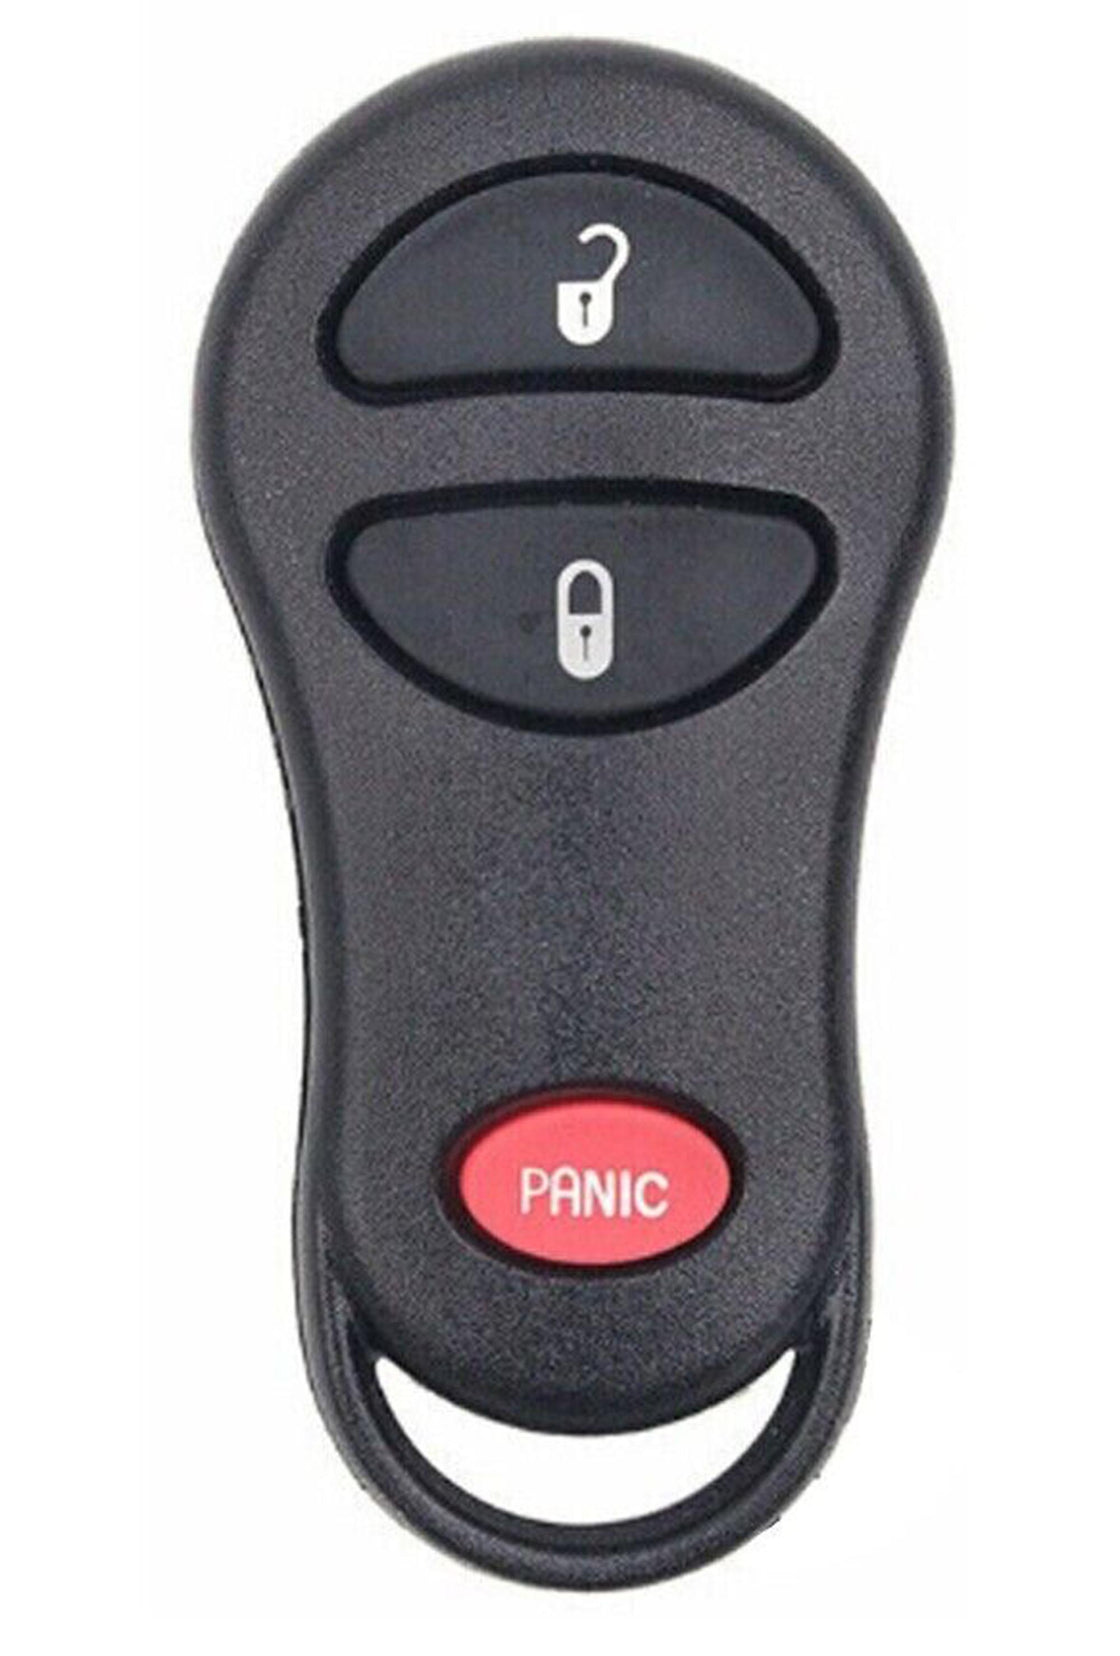 2000 Plymouth Voyager Replacement Key Fob Remote